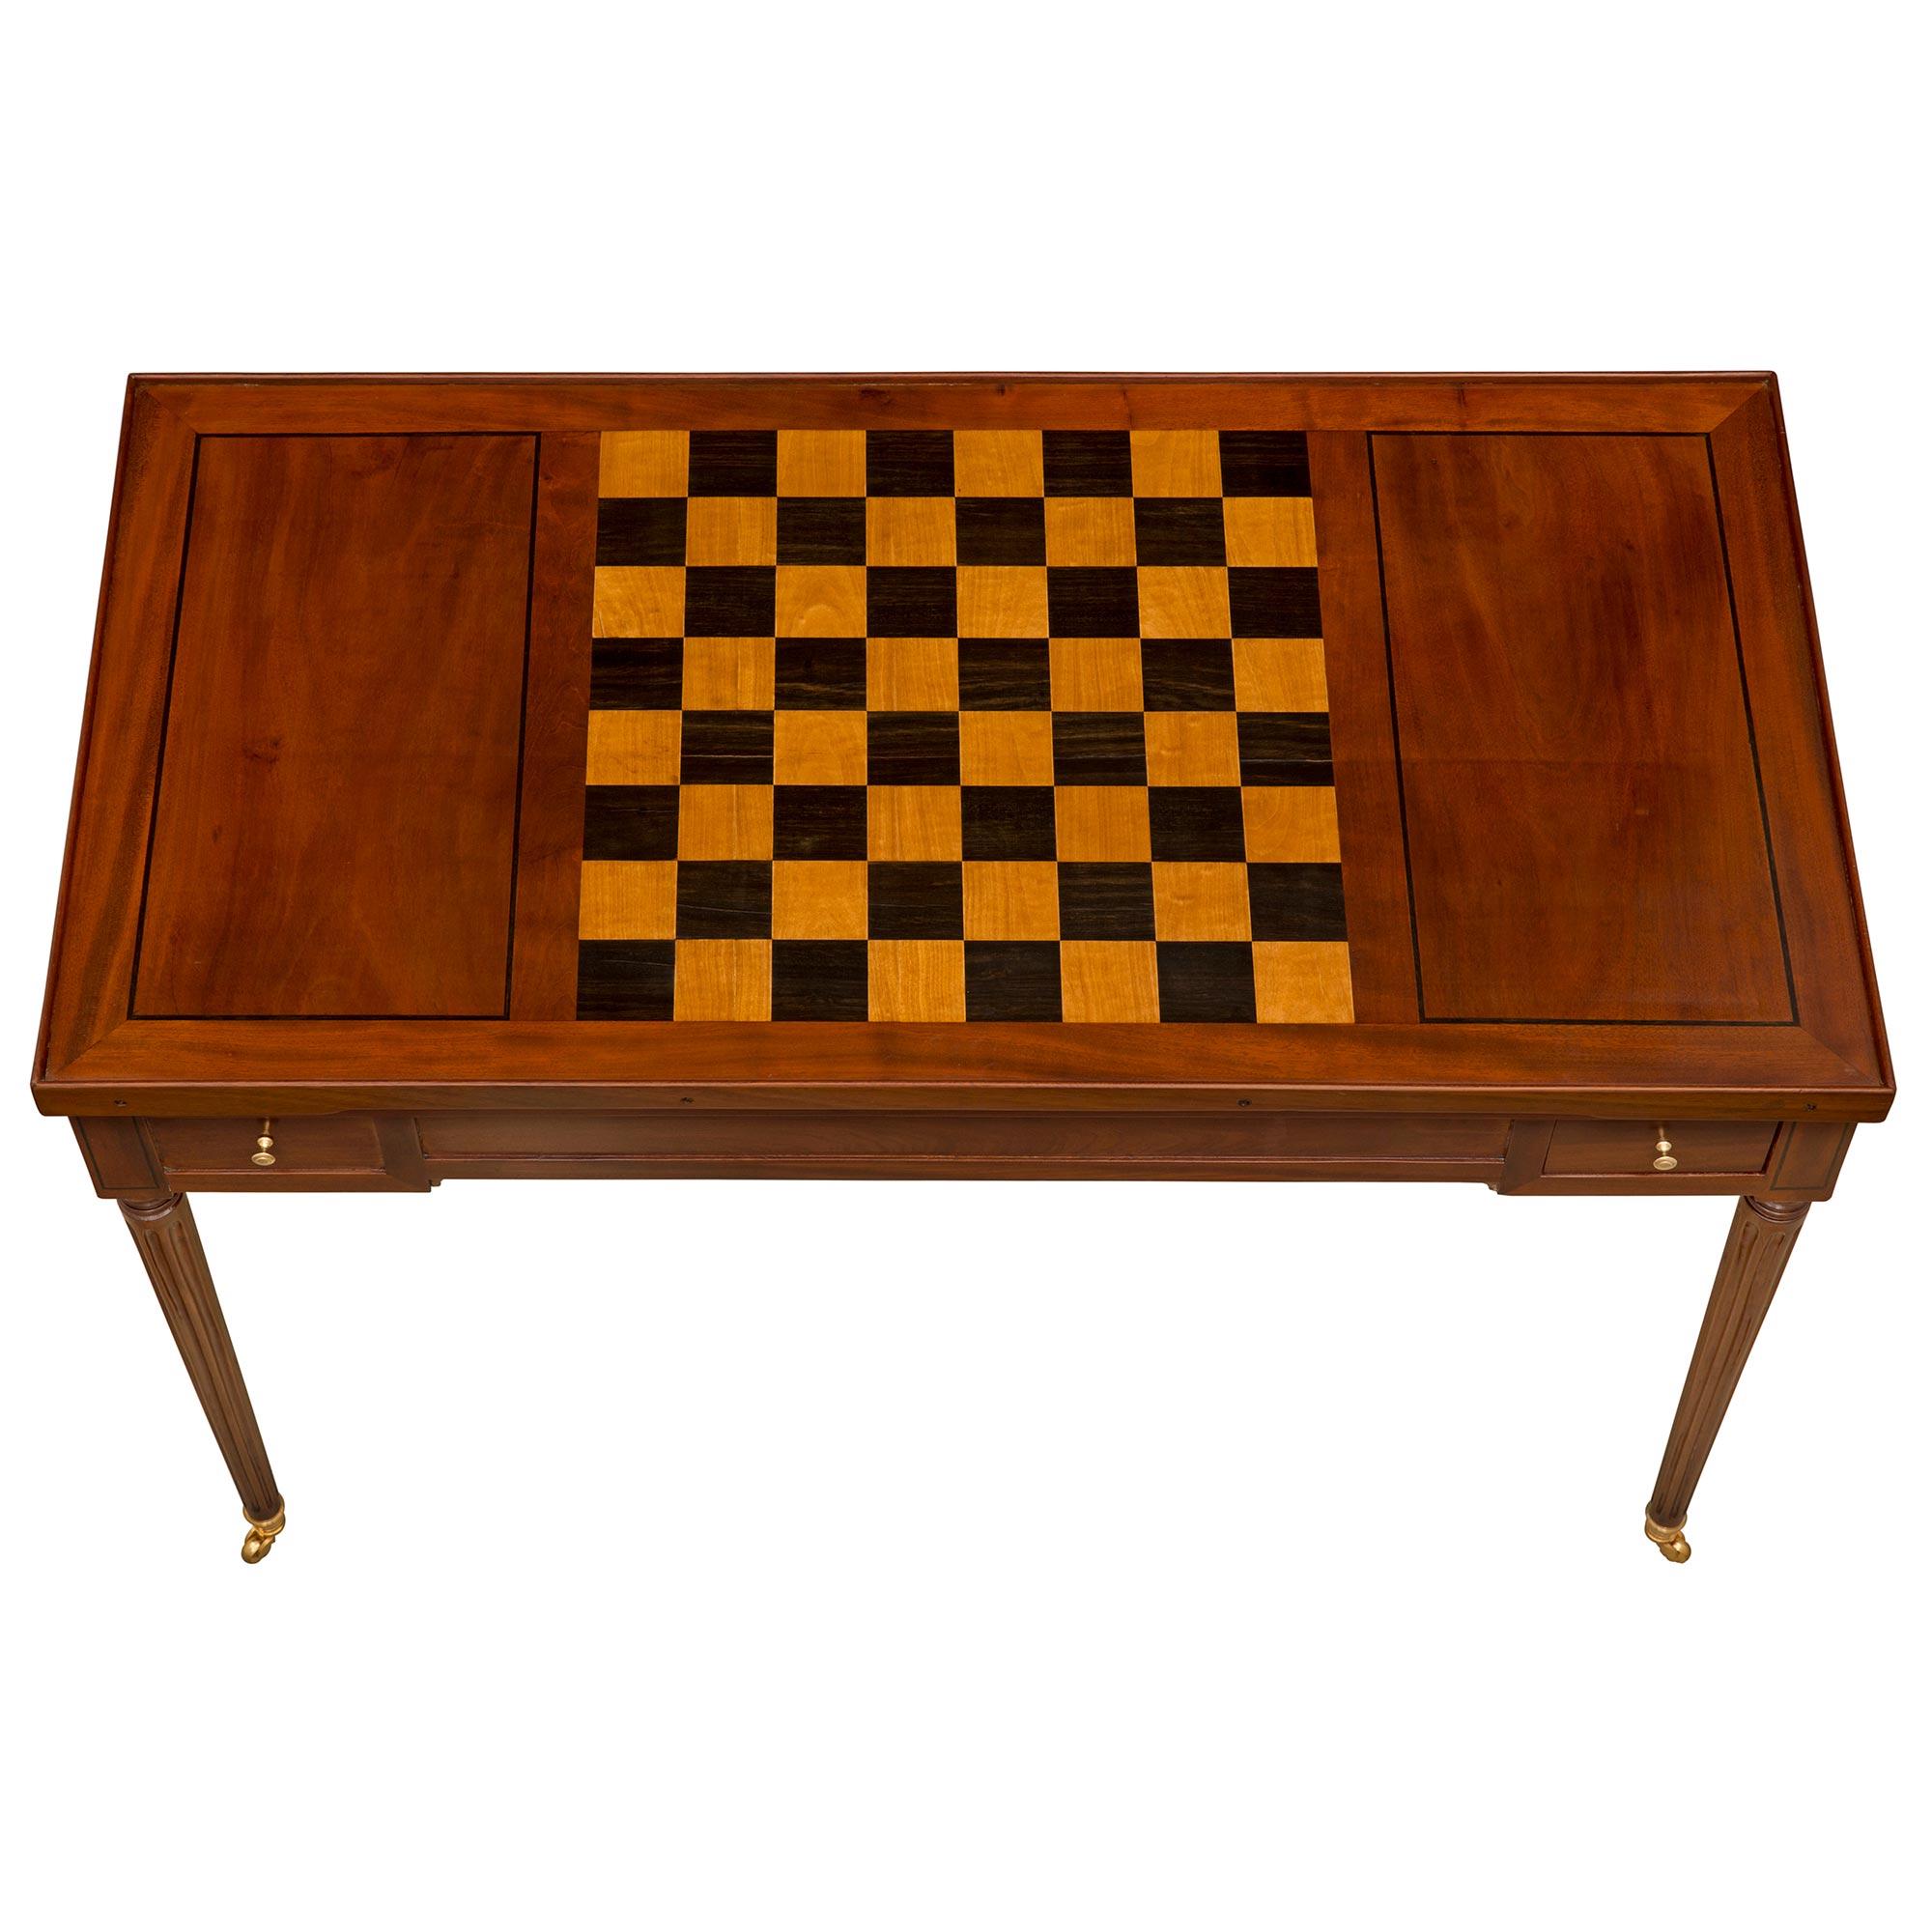 18th Century and Earlier French 18th Century Louis XVI Period Mahogany “Tric Trac” Games Table For Sale